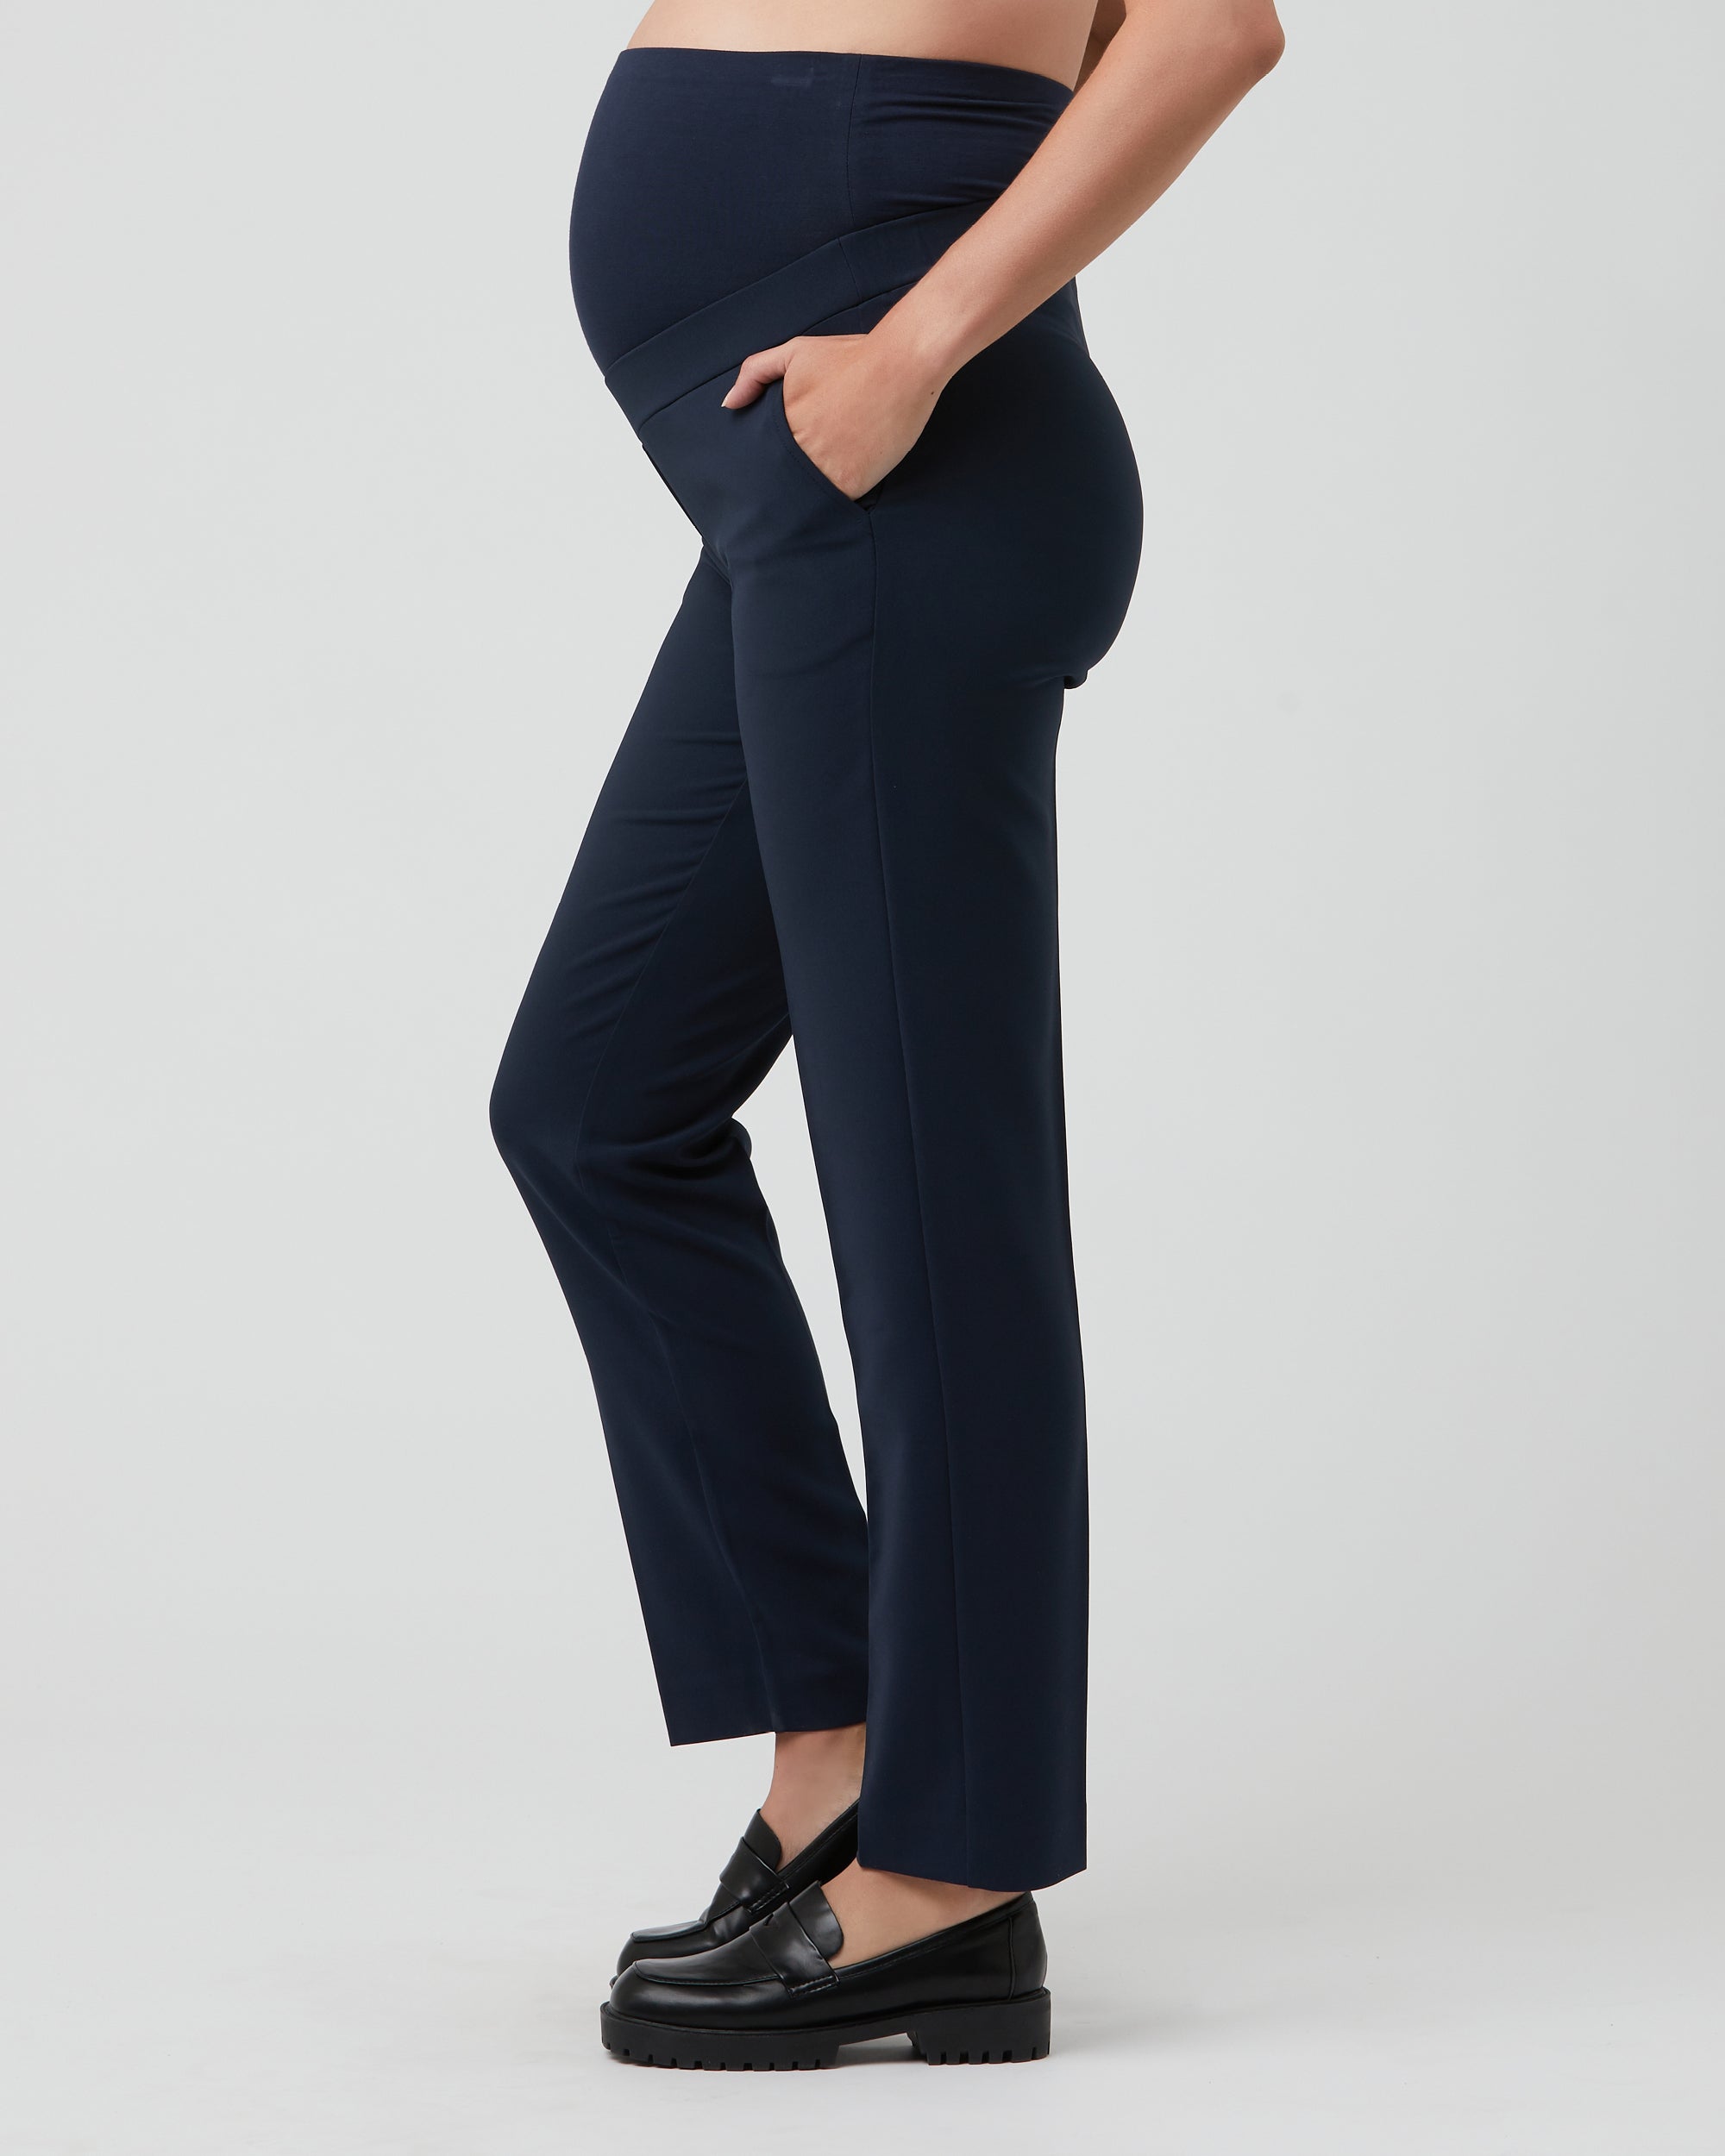 Isabella Oliver Maternity Eda Trousers, Classic Navy at John Lewis &  Partners